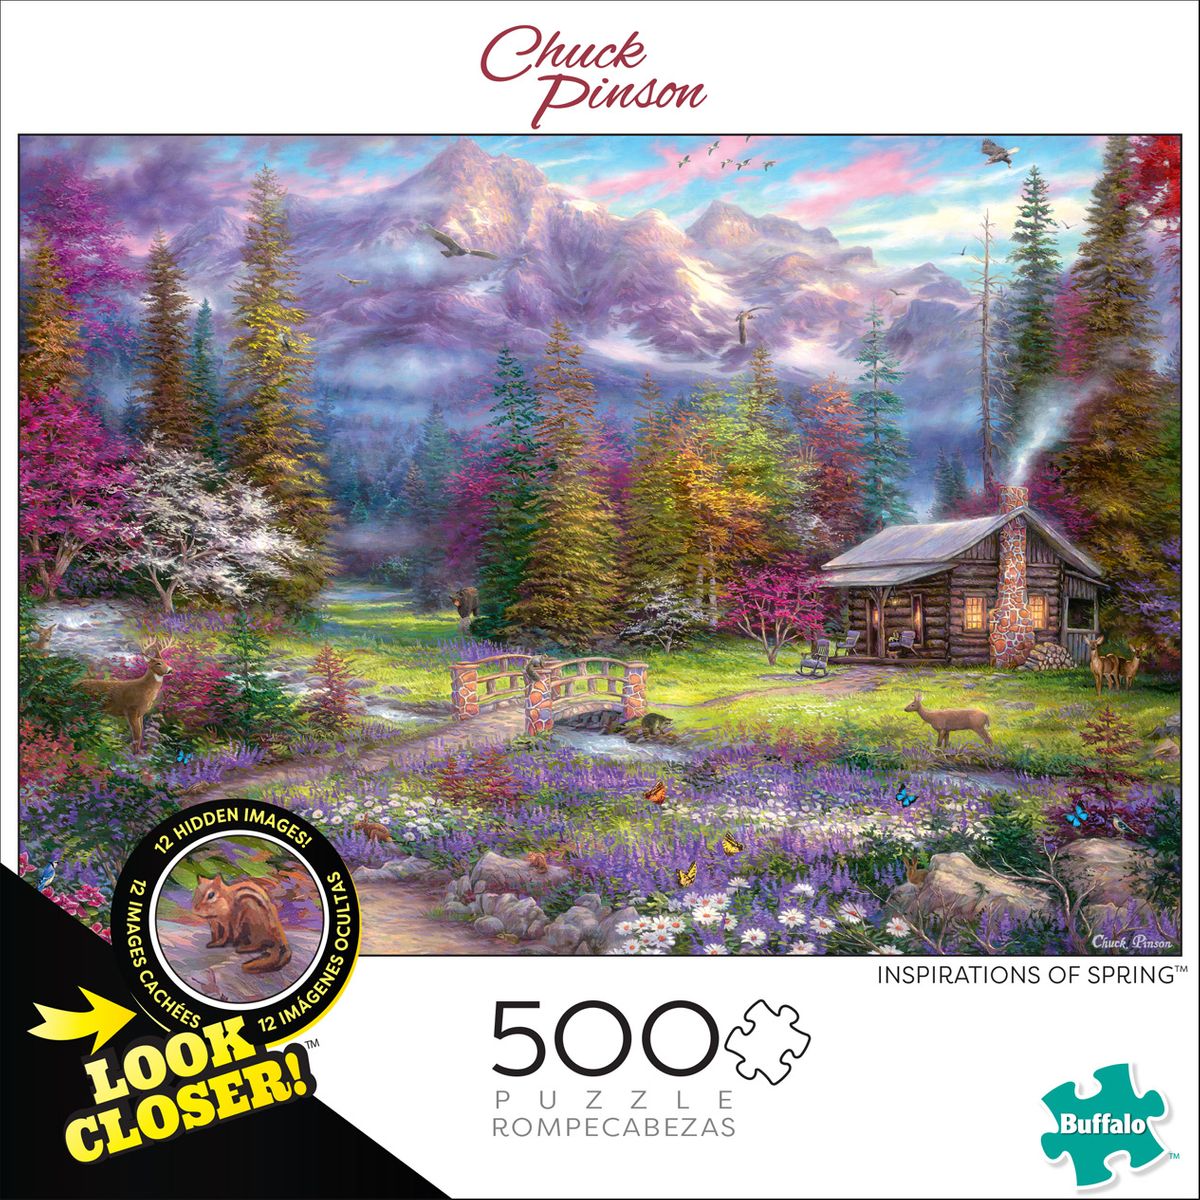 [RDY] [送料無料] Buffalo Games - Look Closer - Inspirations of Spring - 500 Piece Jigsaw Puzzle [楽天海外通販] | Buffalo Games - Look Closer - Inspirations of Spring - 500 Piece Jigsaw Puzzle